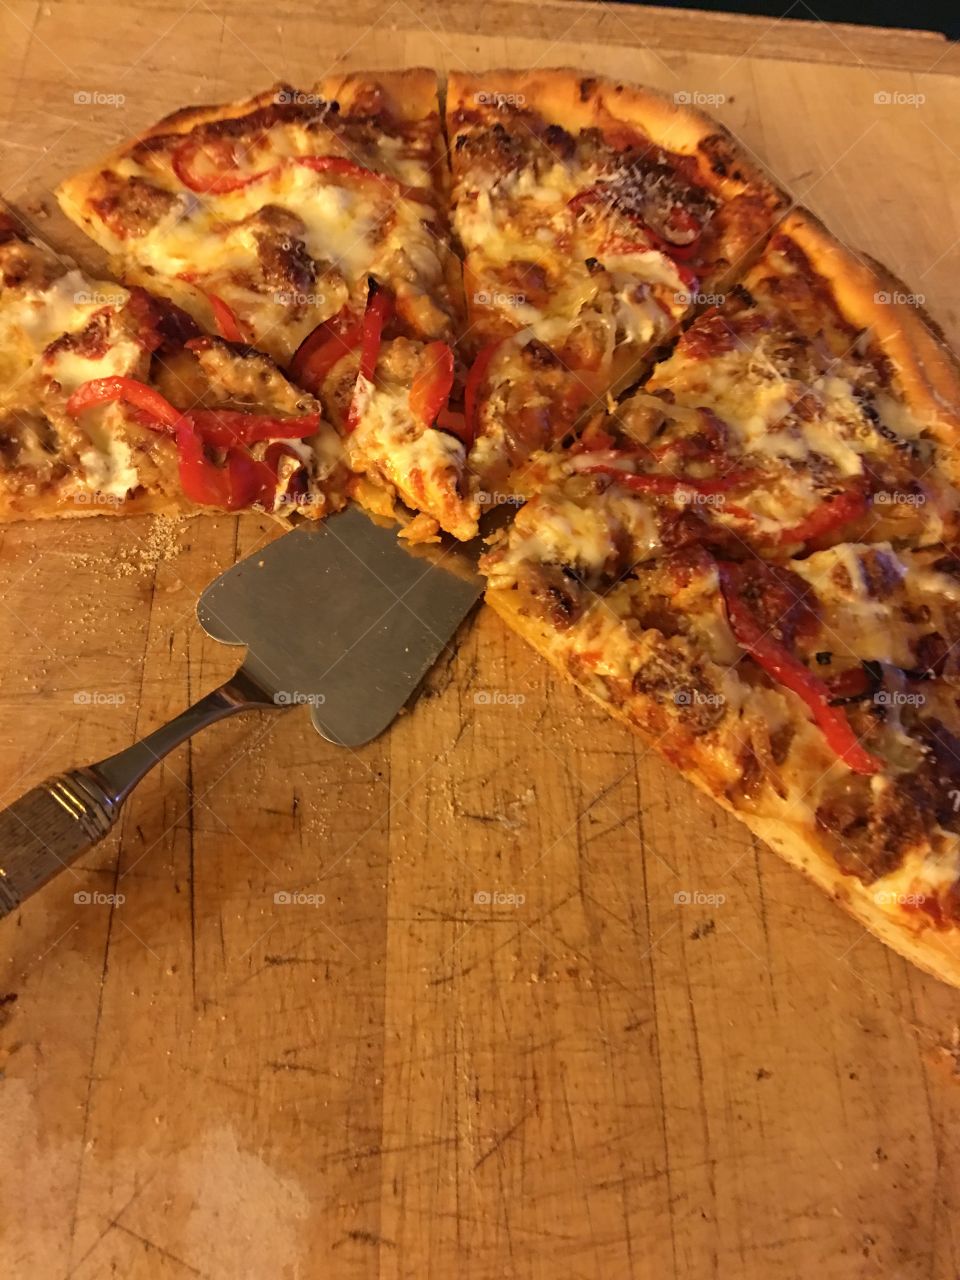 Serving piece of Pizza